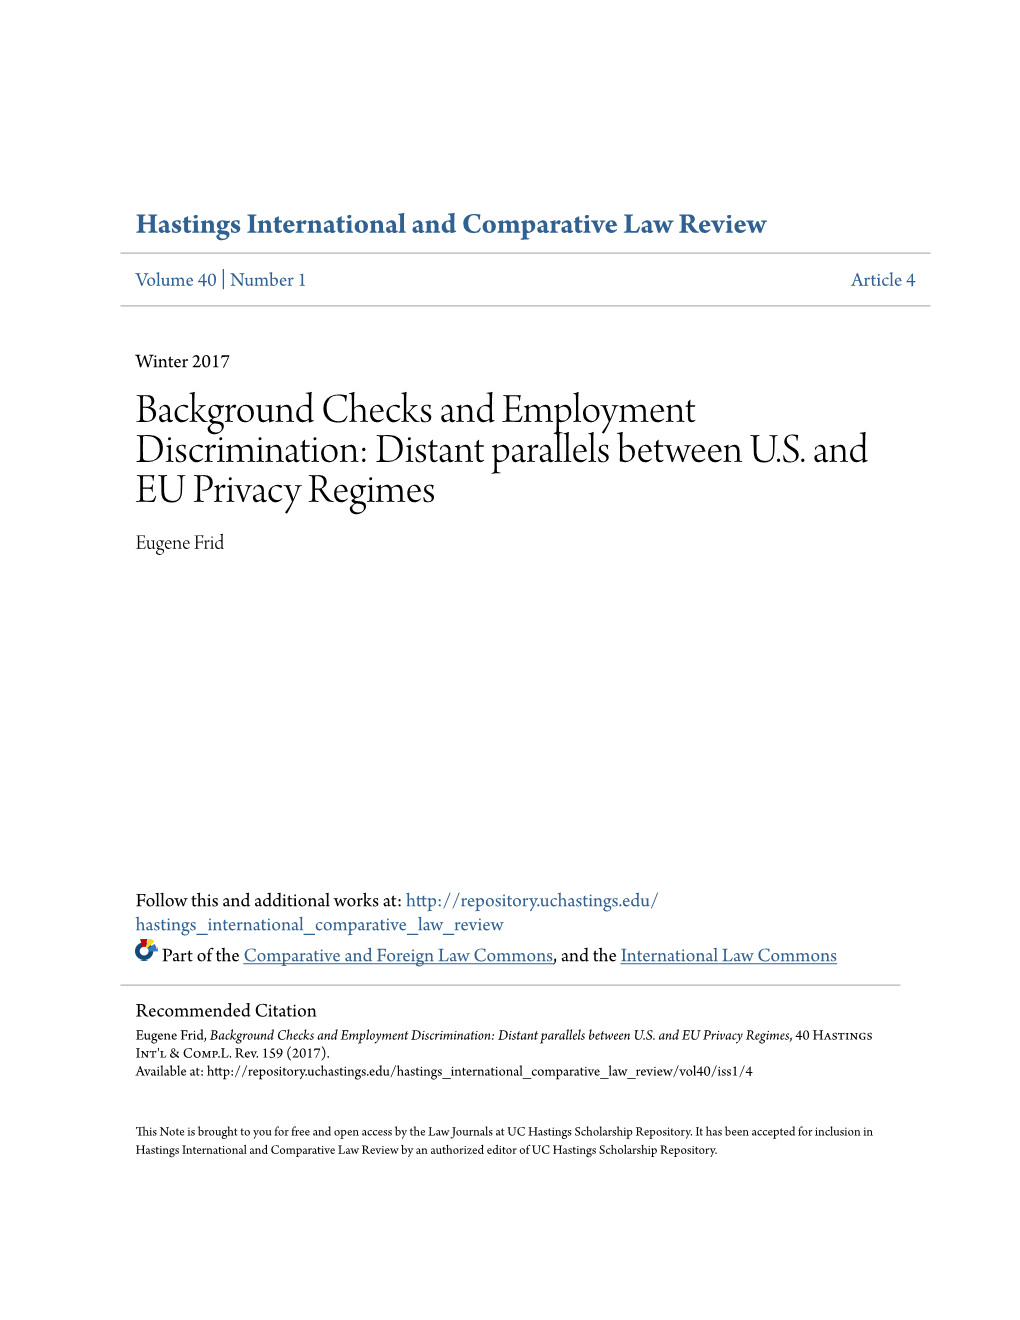 Background Checks and Employment Discrimination: Distant Parallels Between U.S